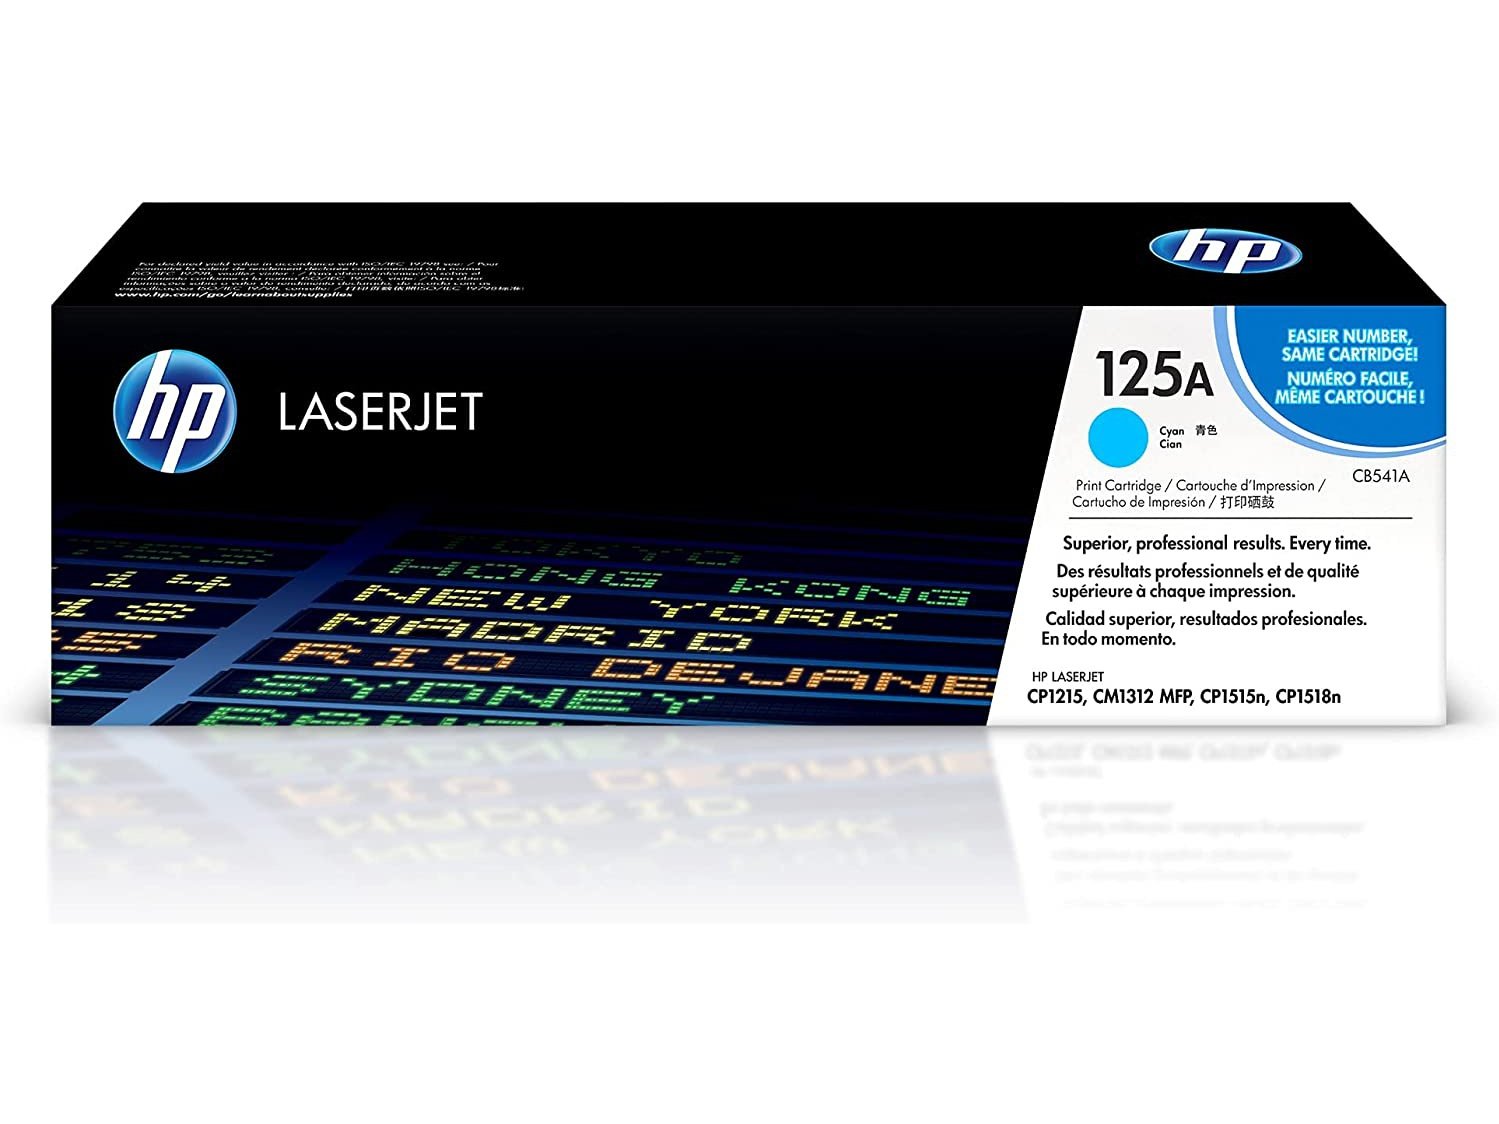 ICU Compatible/ OEM Get HP ICUCB541A Yields 1400 Pages Cyan CB541A (125A) Laser Toner Cartridge for Hewlett Packard (HP) CM1312/CP1215/CP1515 - Ink Cartridges USA